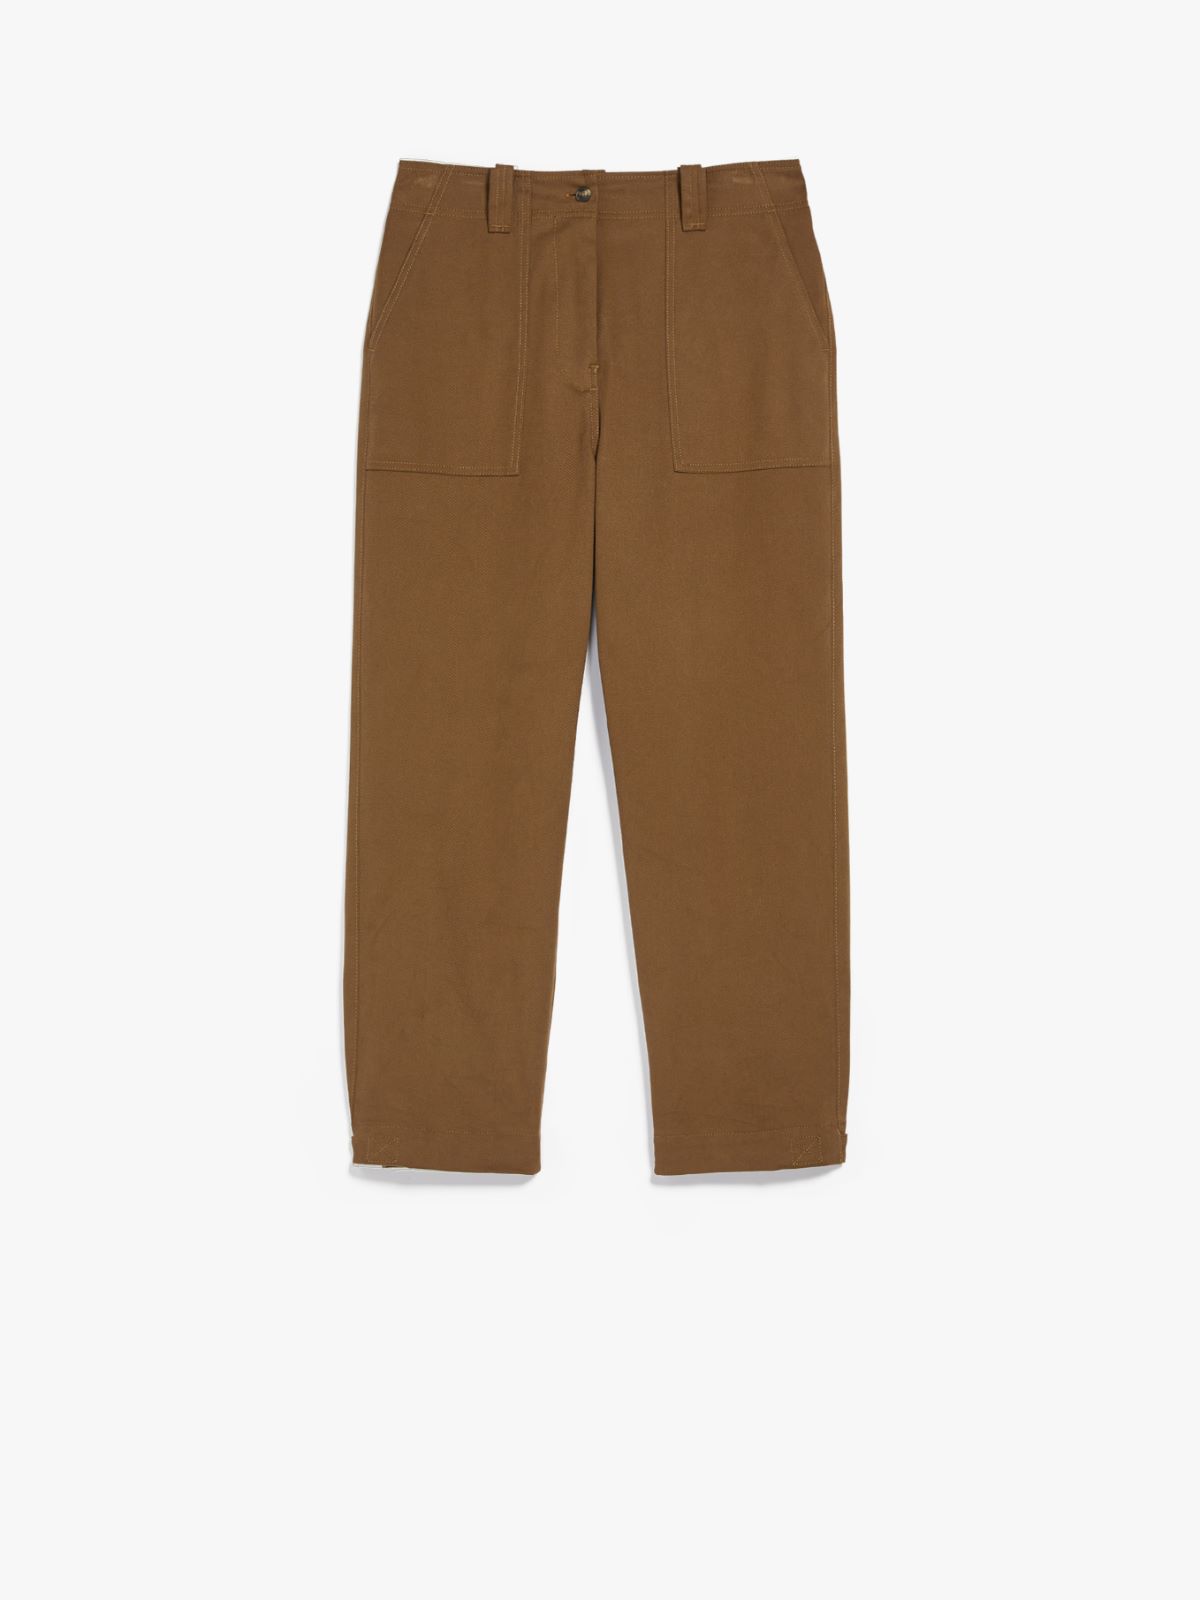 Cotton drill trousers - TOBACCO - Weekend Max Mara - 5